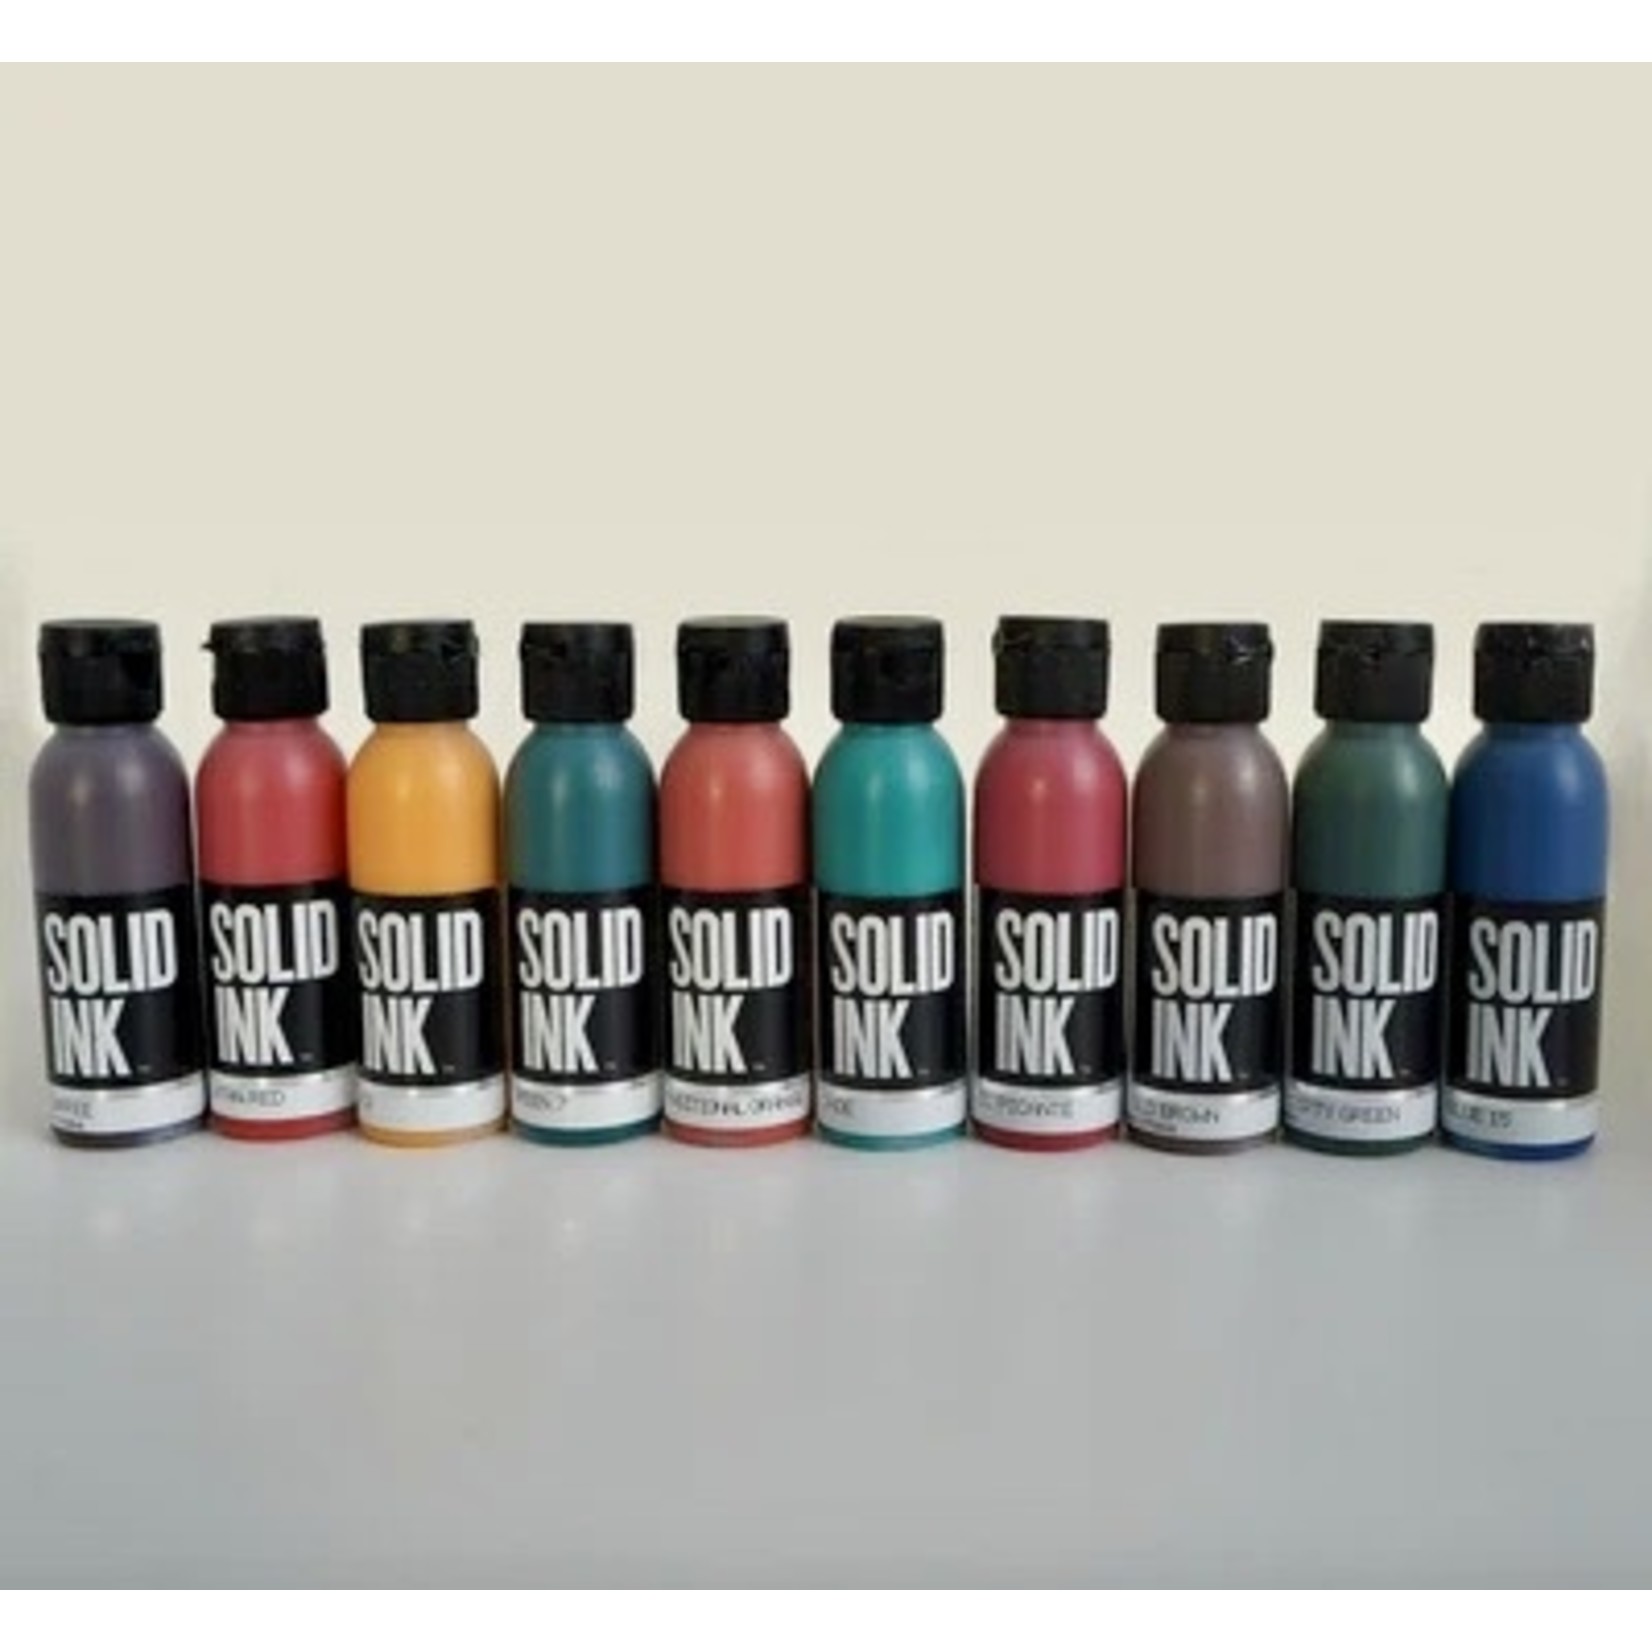 SOLID INK OLD PIGMENTS SET OF 10